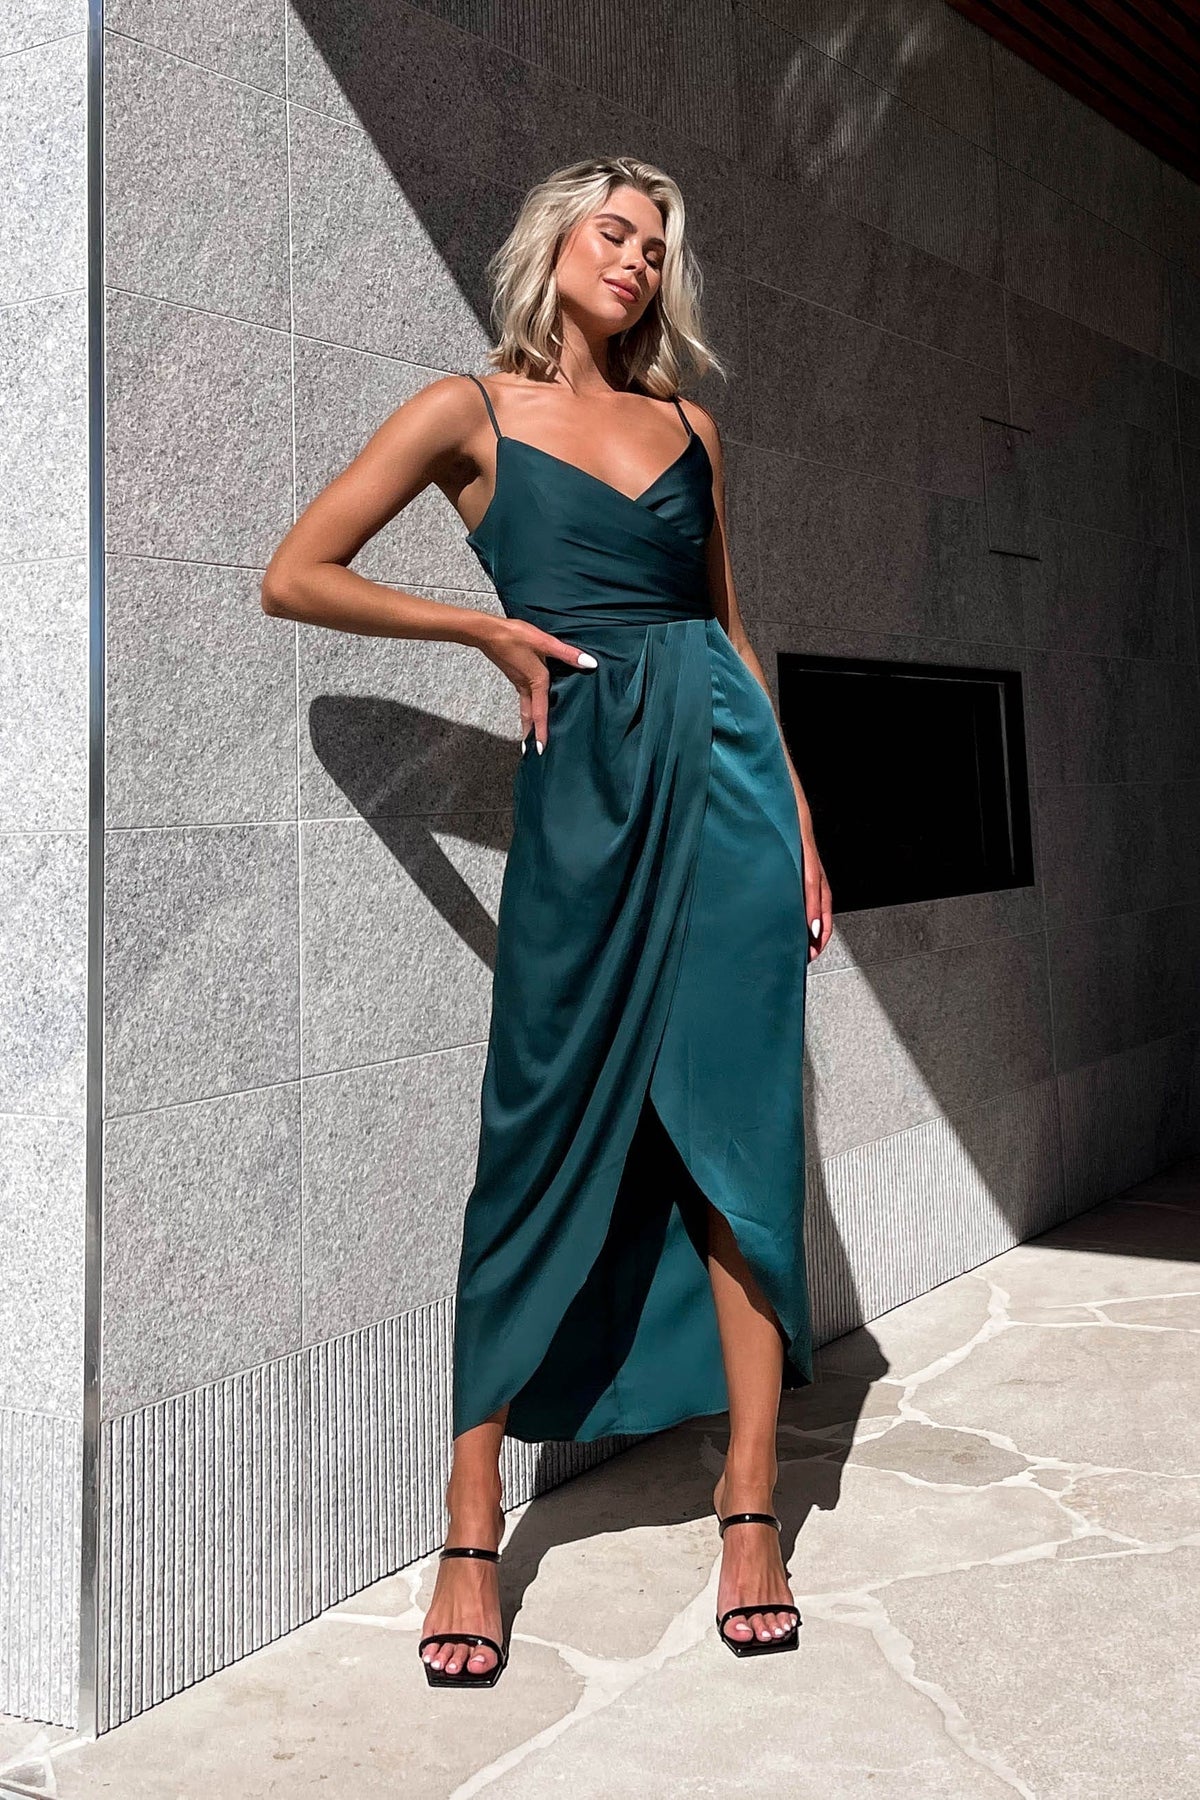 Yessica Dress, DRESS, DRESSES, GREEN, MIDI DRESS, new arrivals, POLYESTER &amp; SPANDEX, POLYESTER AND SPANDEX, SPANDEX AND POLYESTER, WAIST TIE, , -MISHKAH